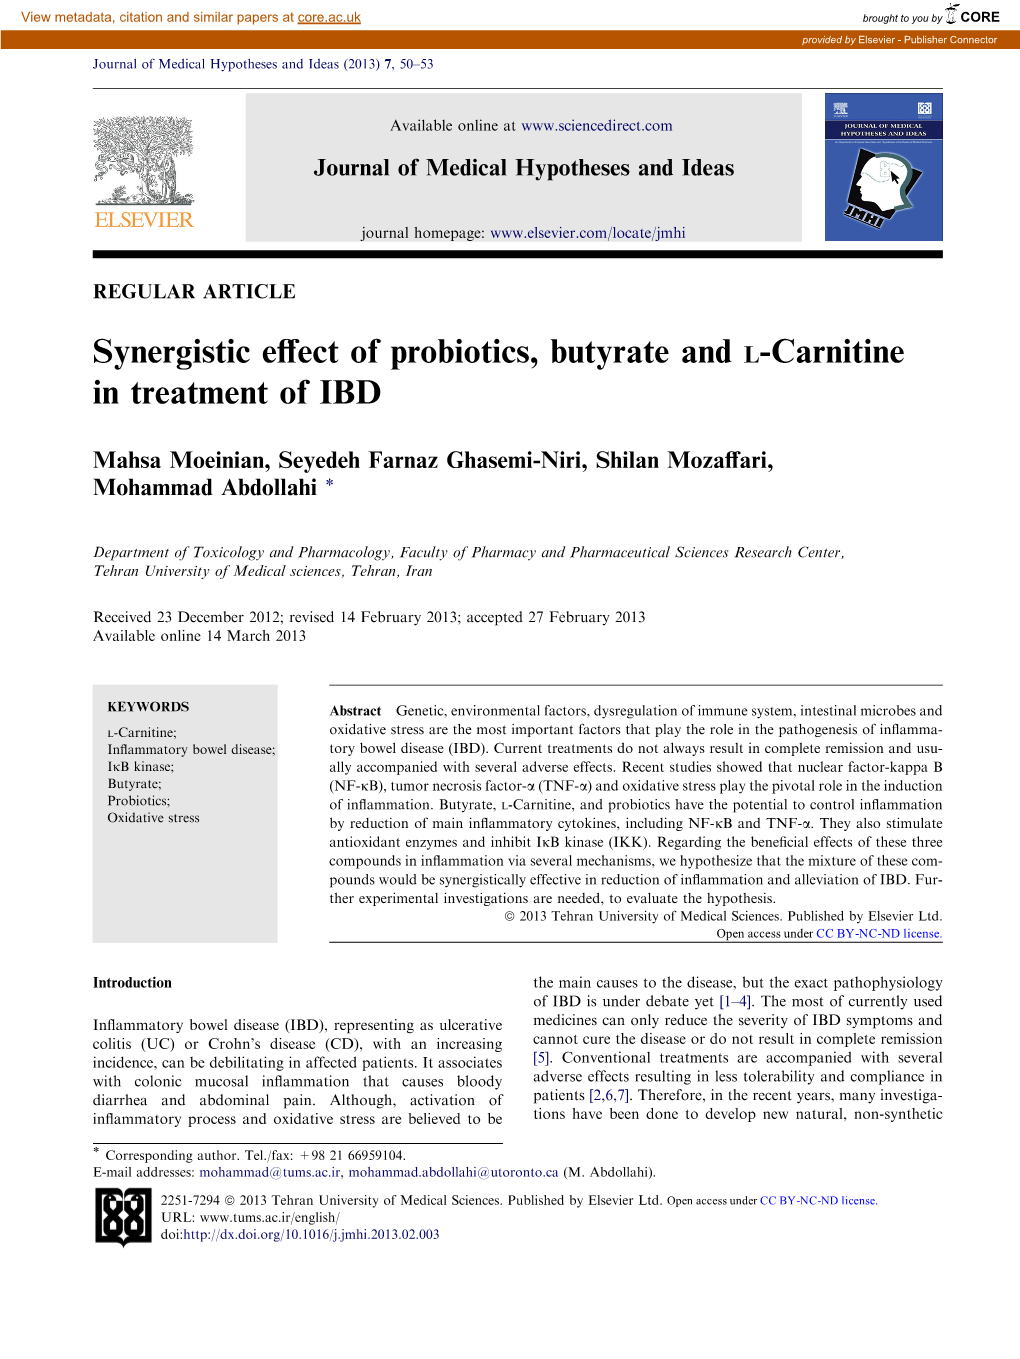 Synergistic Effect of Probiotics, Butyrate and L-Carnitine In